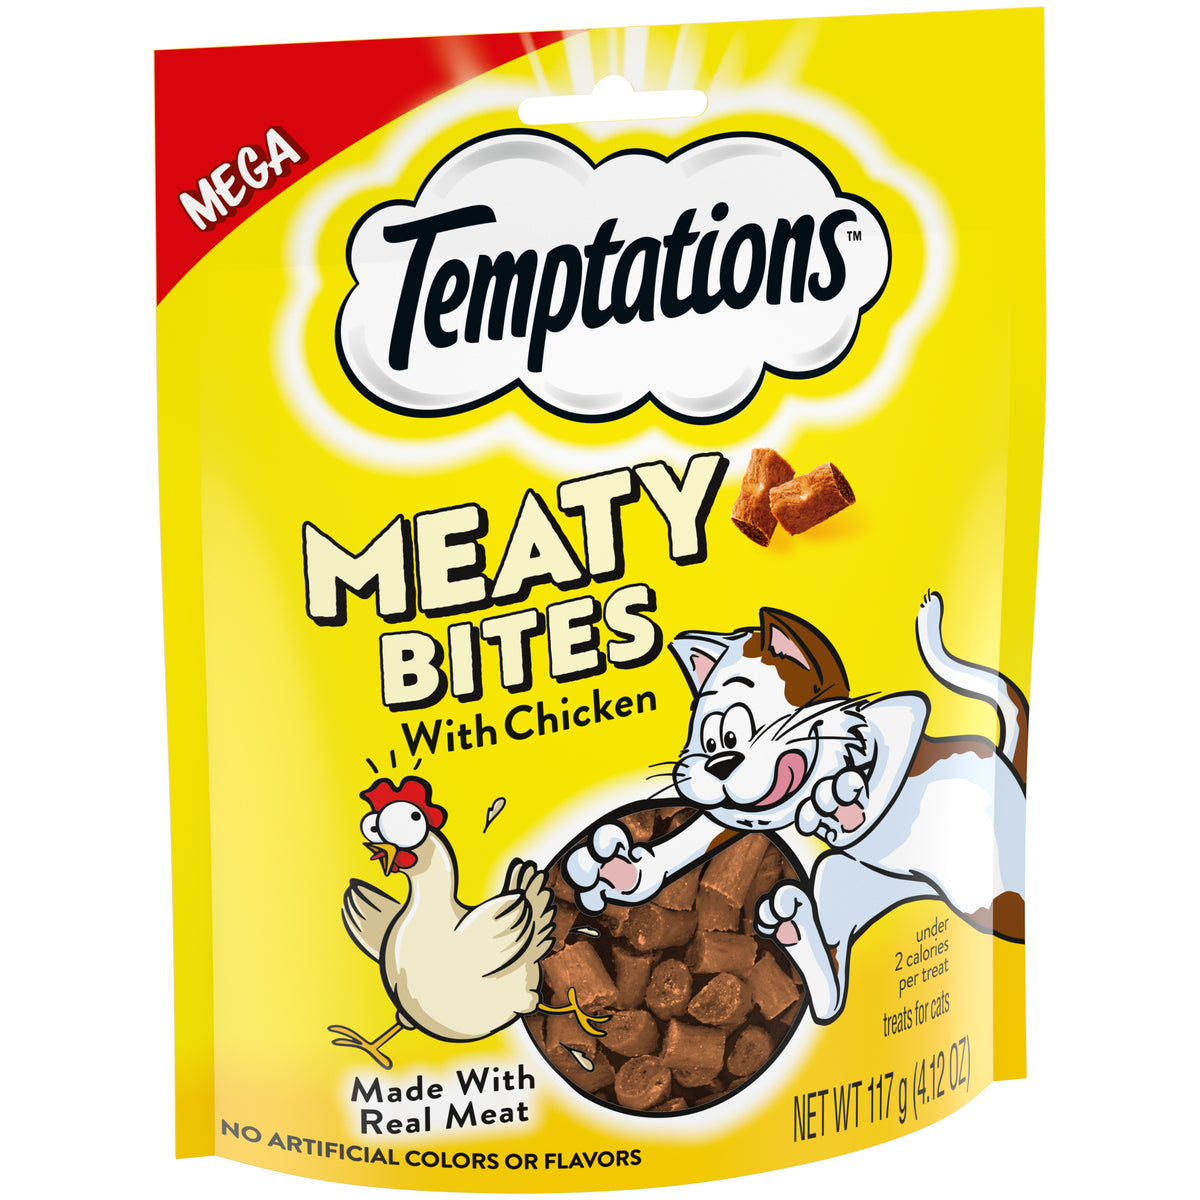 [Temptations][TEMPTATIONS Meaty Bites, Soft and Savory Cat Treats, Chicken Flavor, 4.1 oz. Pouch][Image Center Left (3/4 Angle)]